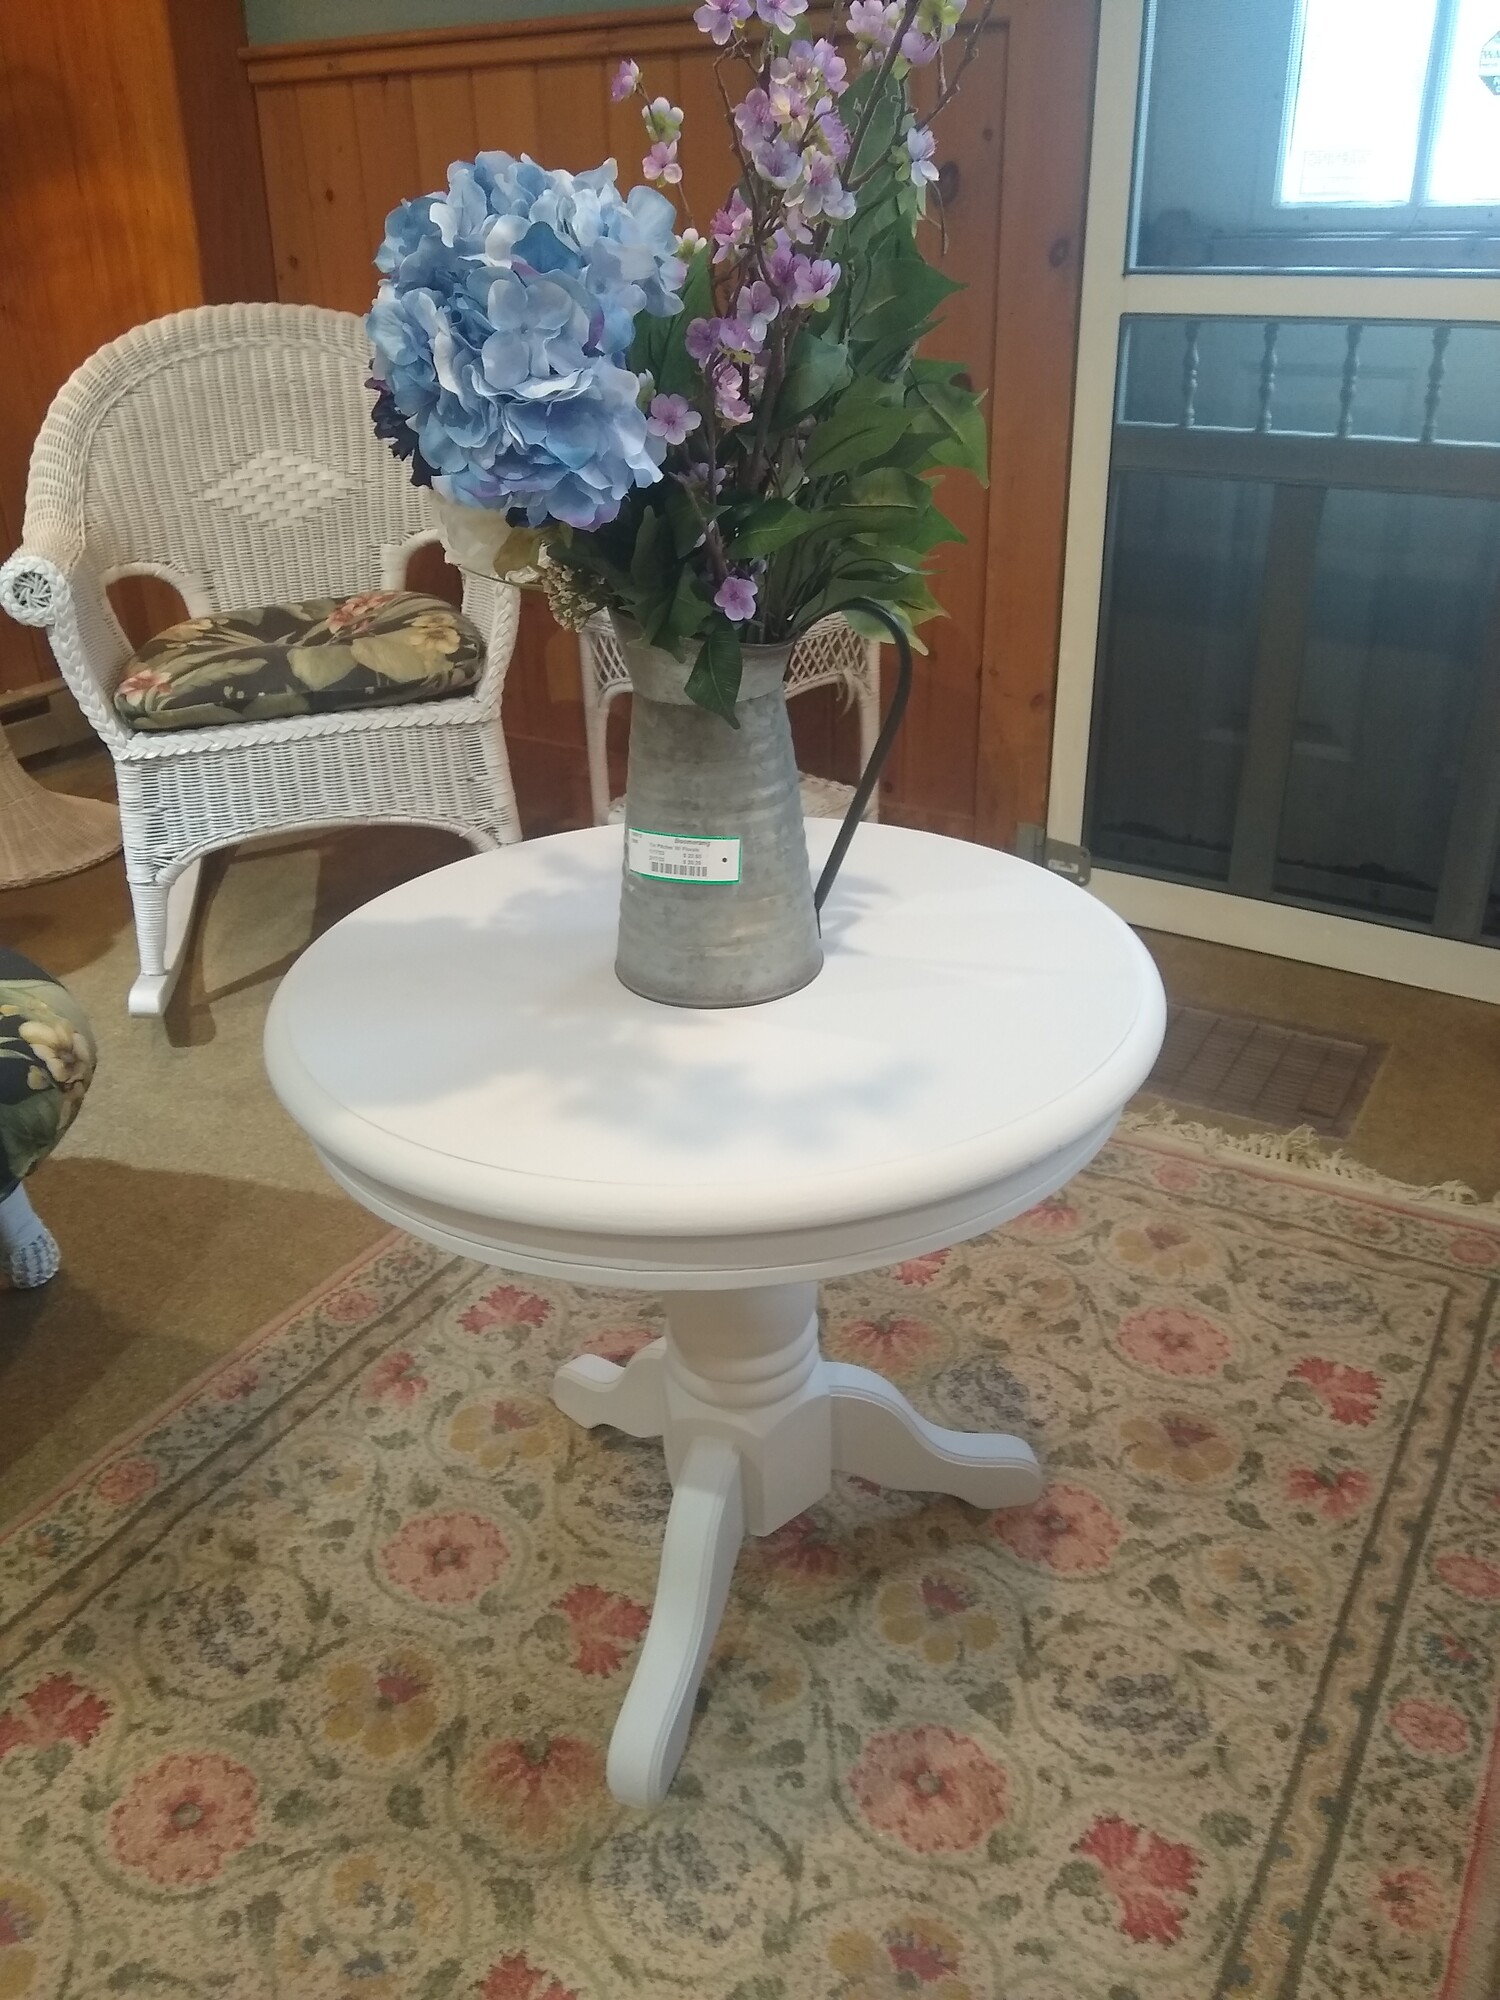 Lt Grey Rnd Pedestal Table

Painted light grey round pedestal table.

Size: 24 in diam X 22 in high